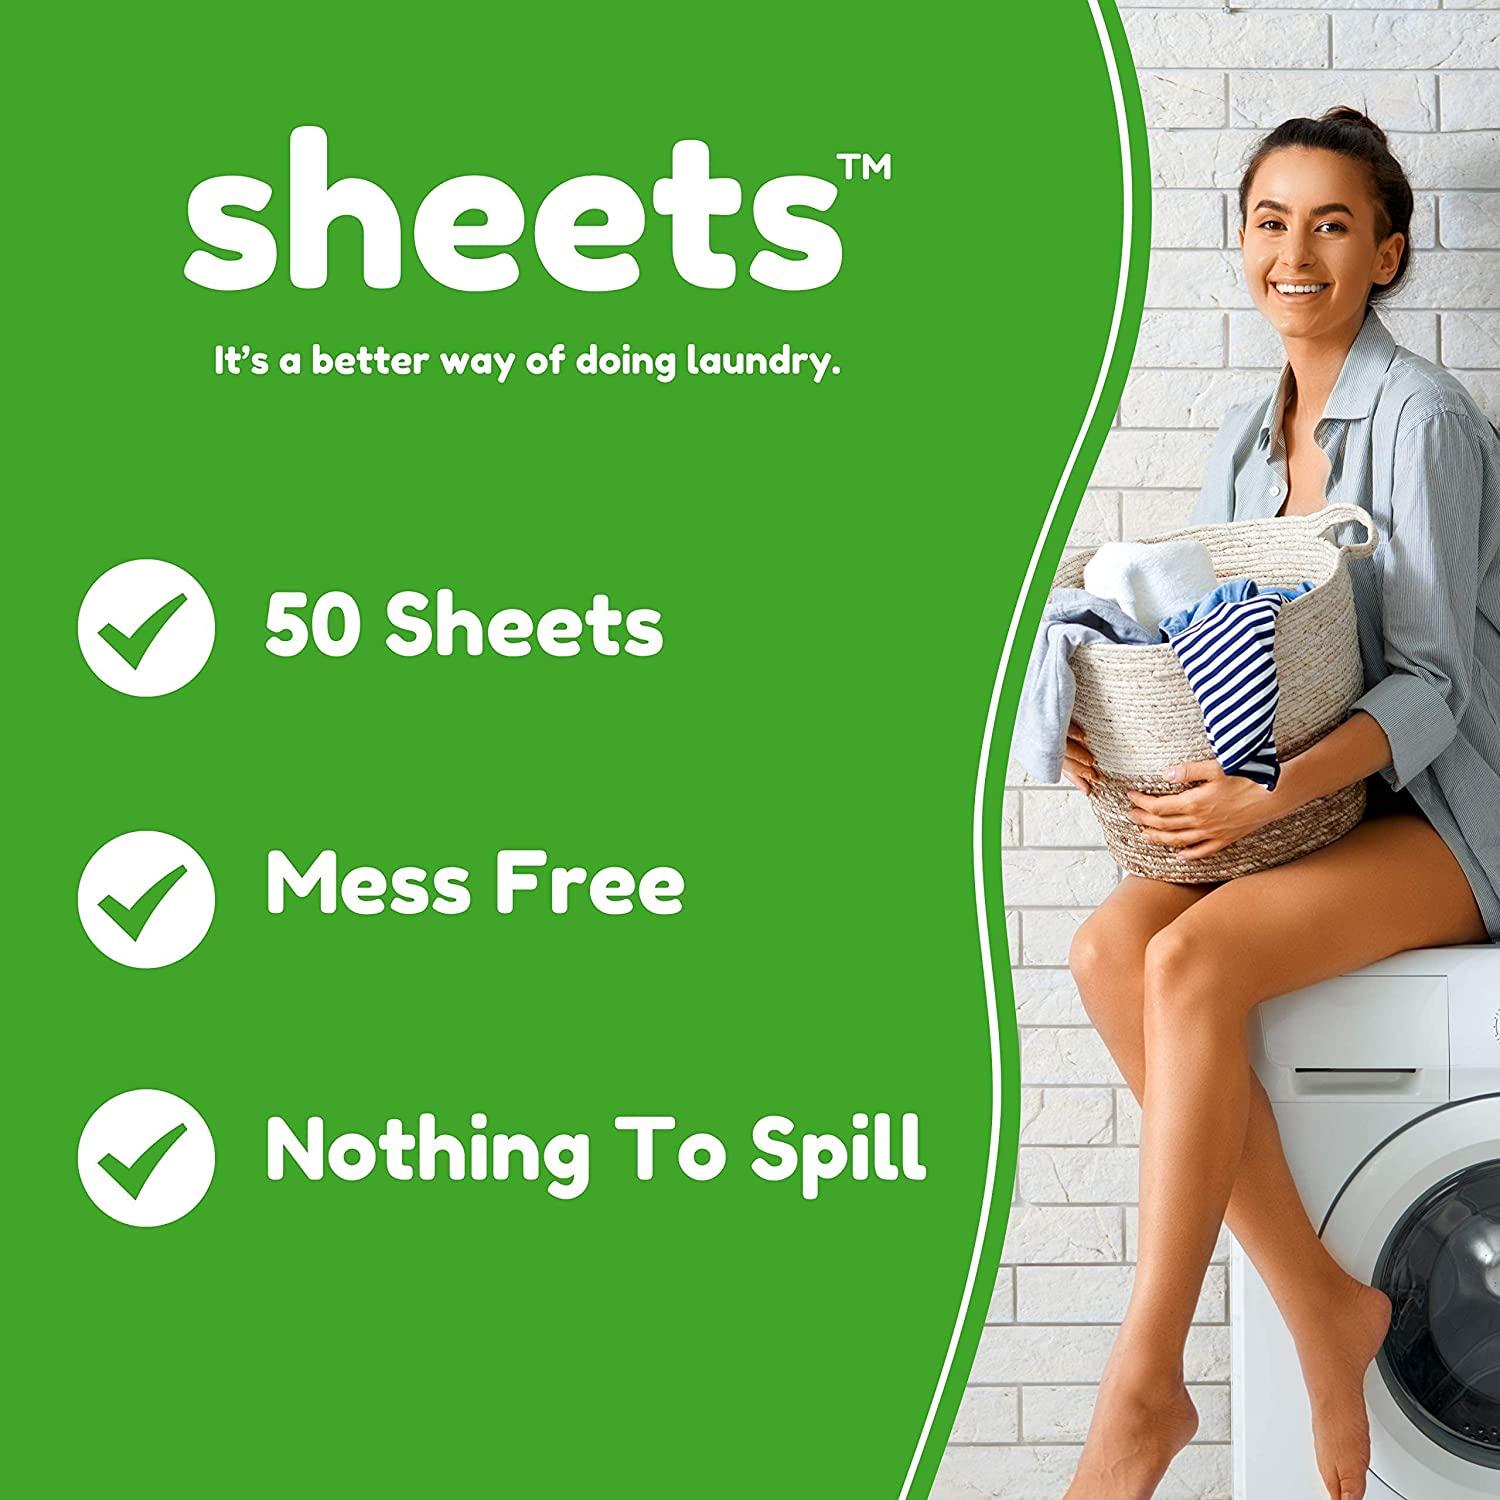 Safe swaps for your laundry room to complete your home detox.